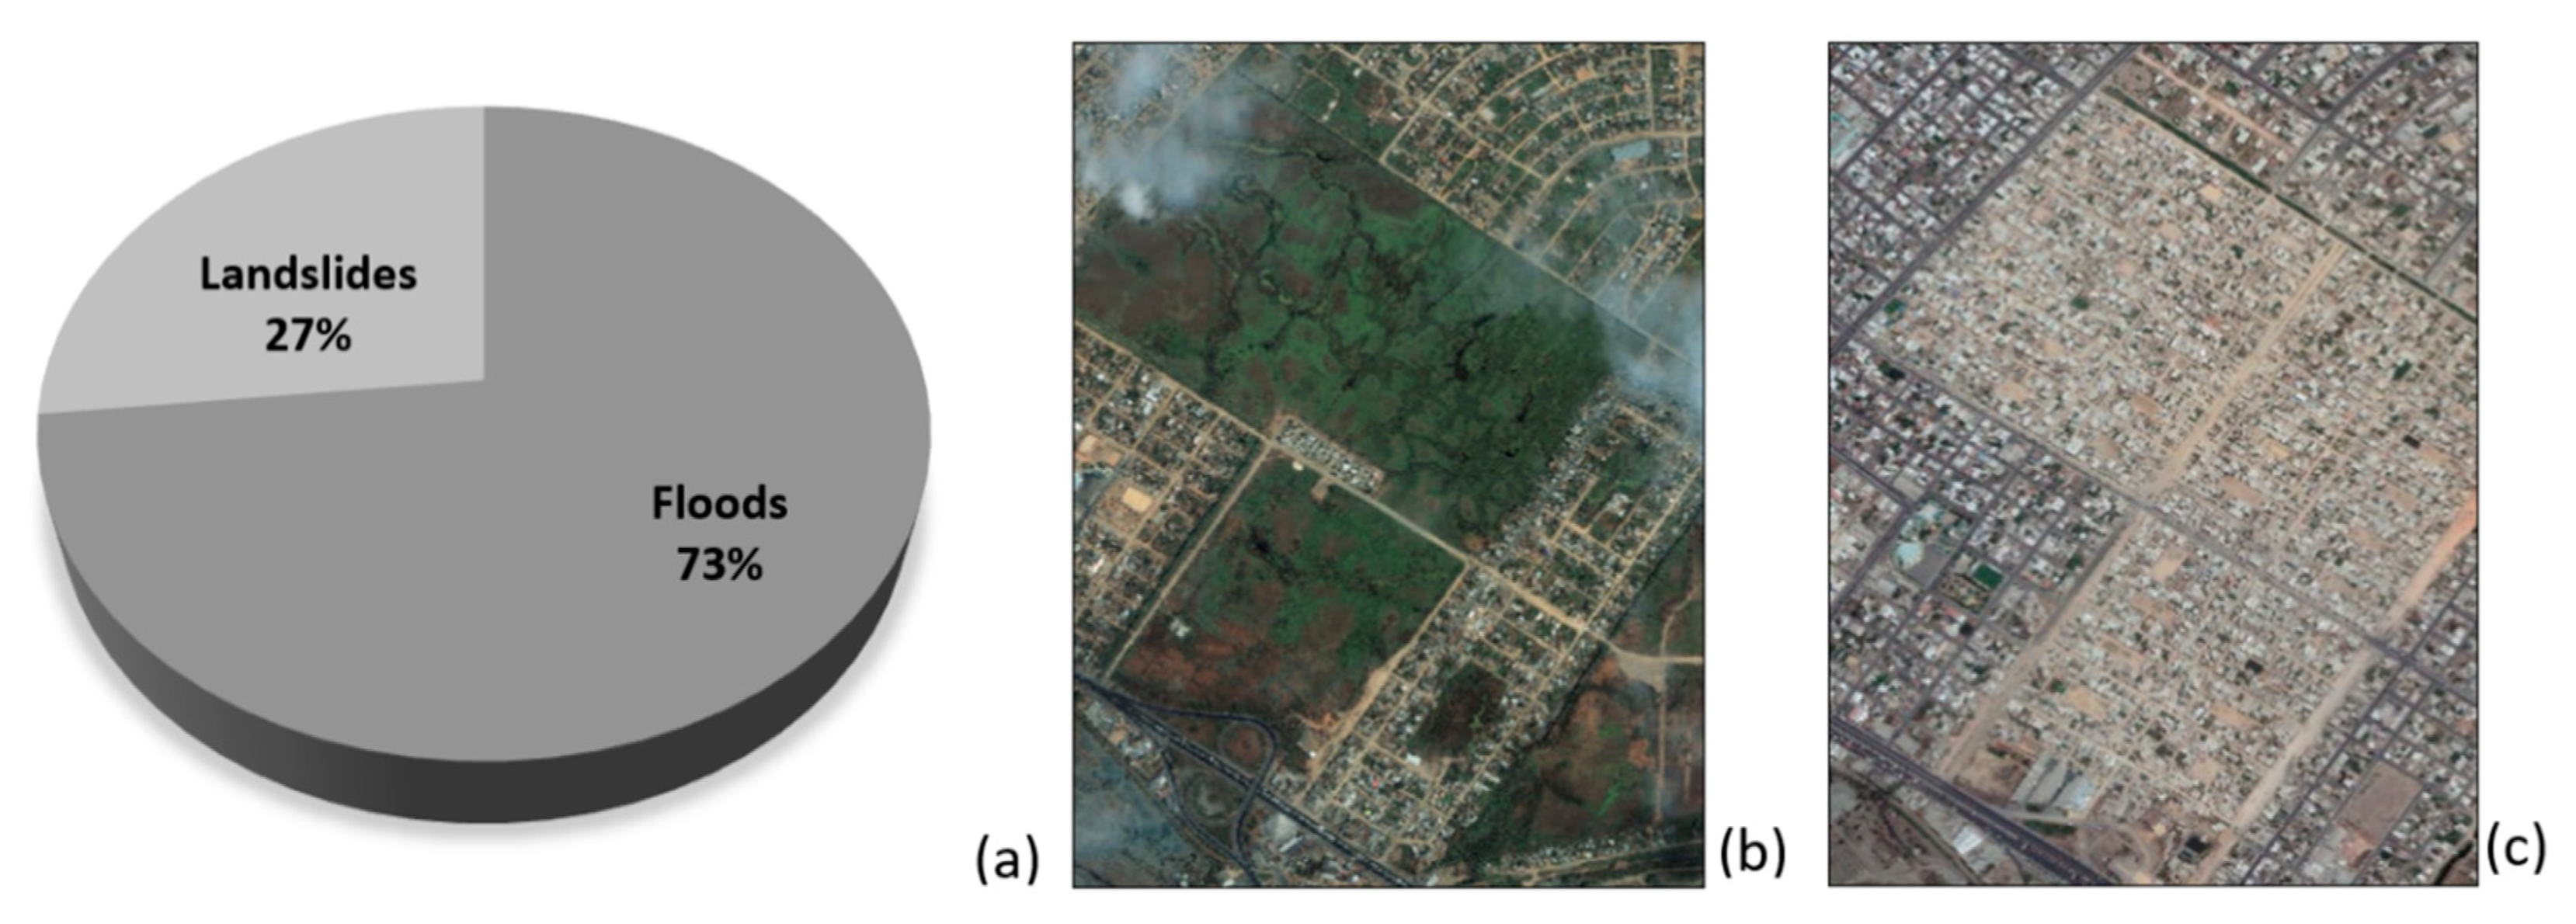 Sustainability | Free Full-Text | An Operational Framework for Urban  Vulnerability to Floods in the Guayas Estuary Region: The Duran Case Study  | HTML